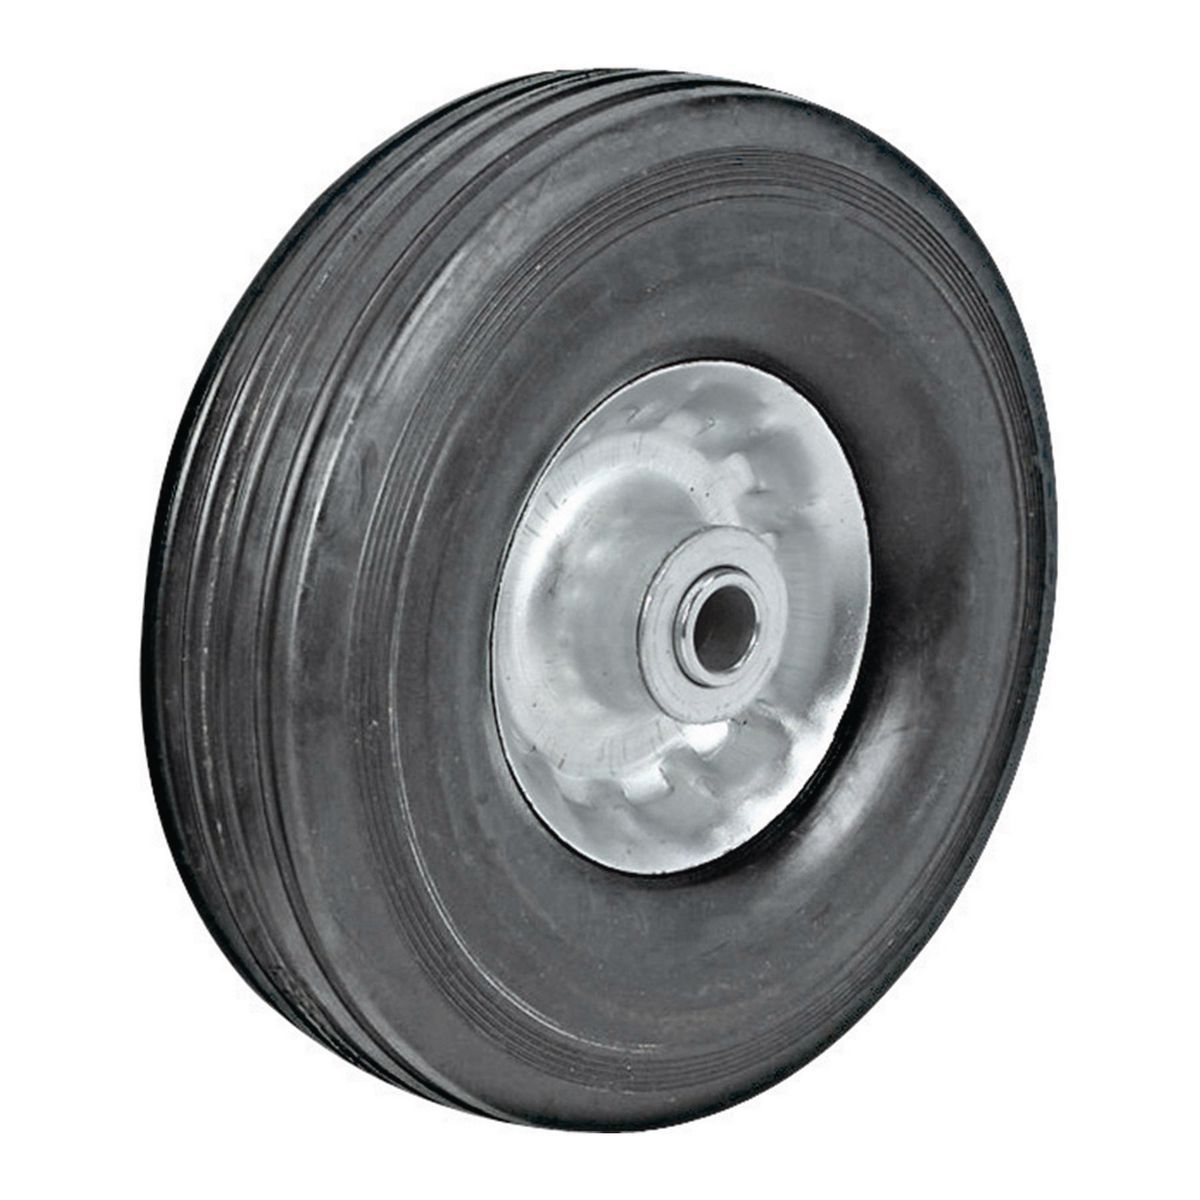 HAUL-MASTER 8" Solid Rubber Tire with Zinc Plated Rim